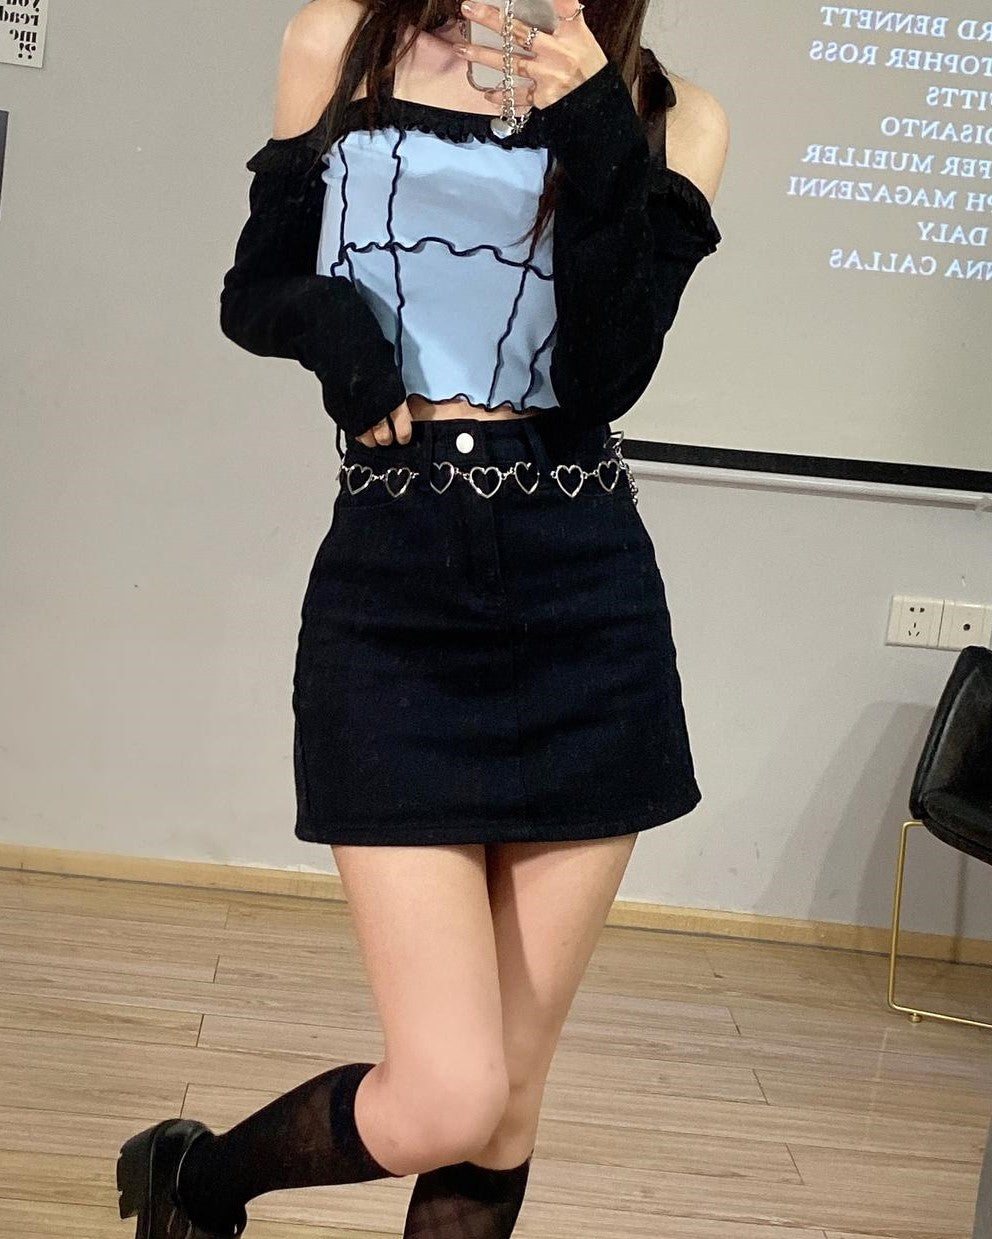 Dreamcatcher Yoohyeon Inspired Blue Stitched Long Sleeves Crop Top